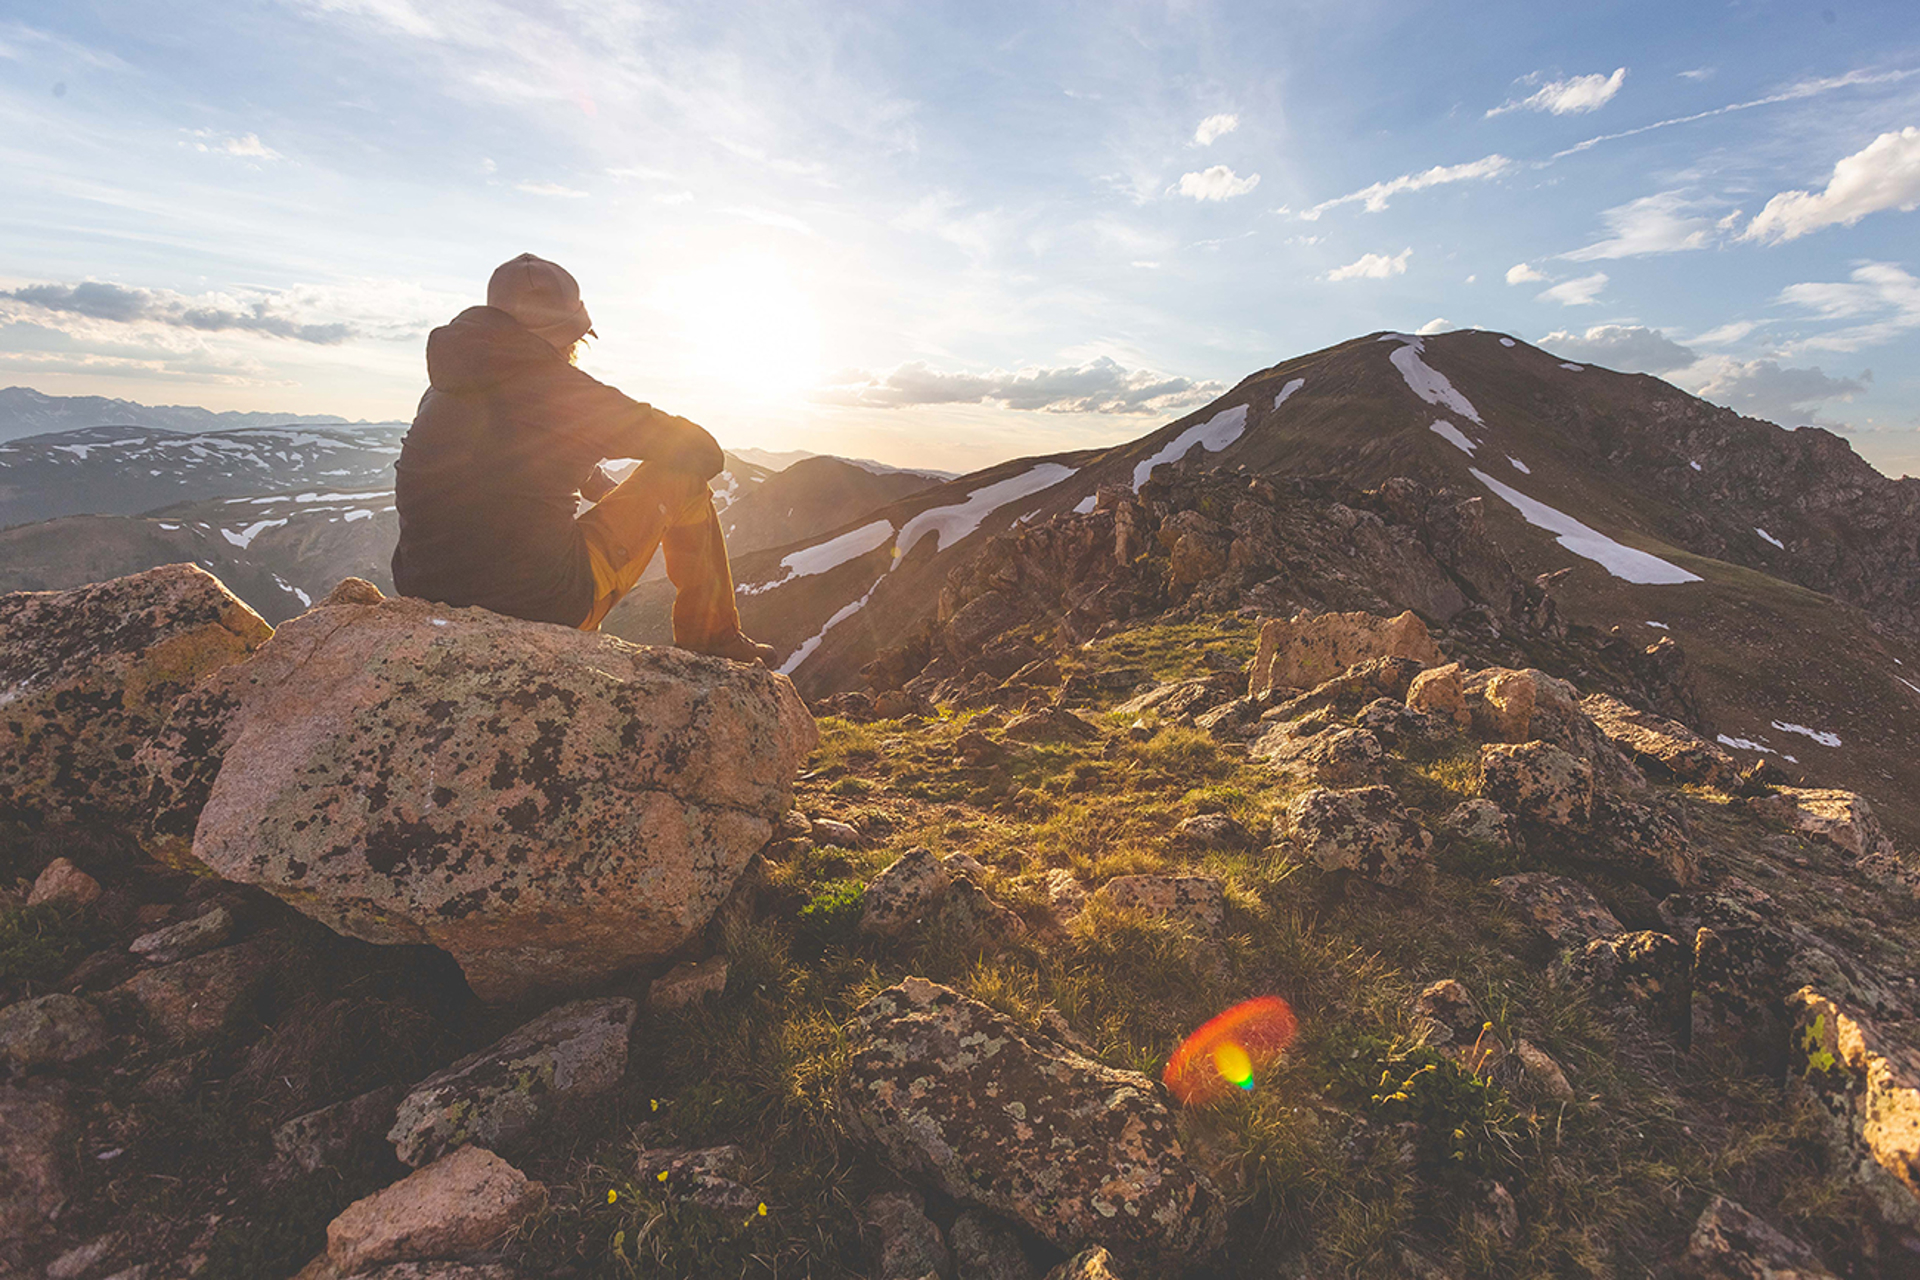 Man in hat, jacket, and yellow pants sitting on rocky mountain top looking over other mountain tops at sunset.